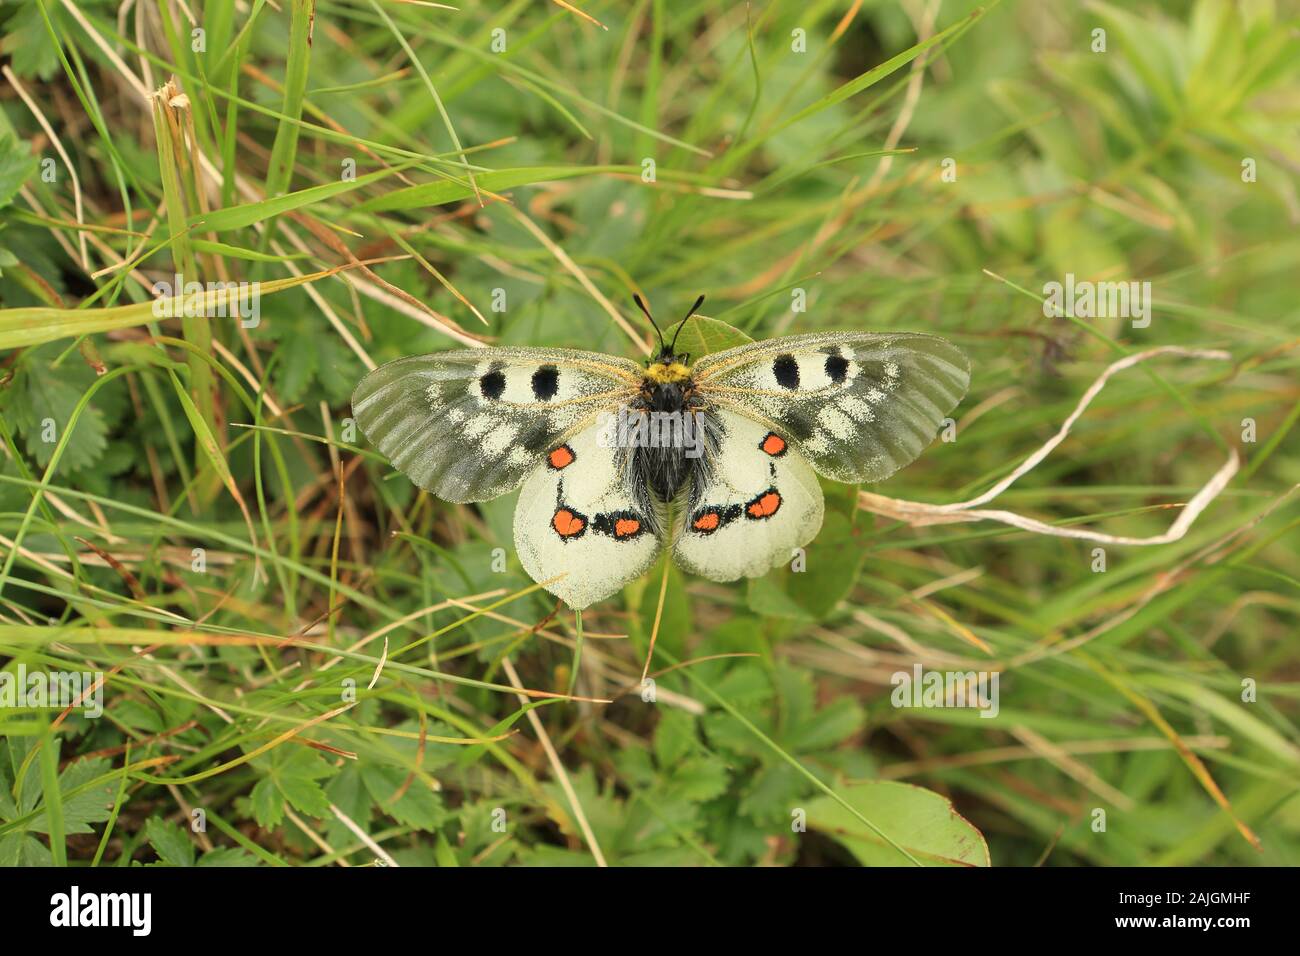 Butterfly on a background of green grass (Genus Parnassius) Stock Photo